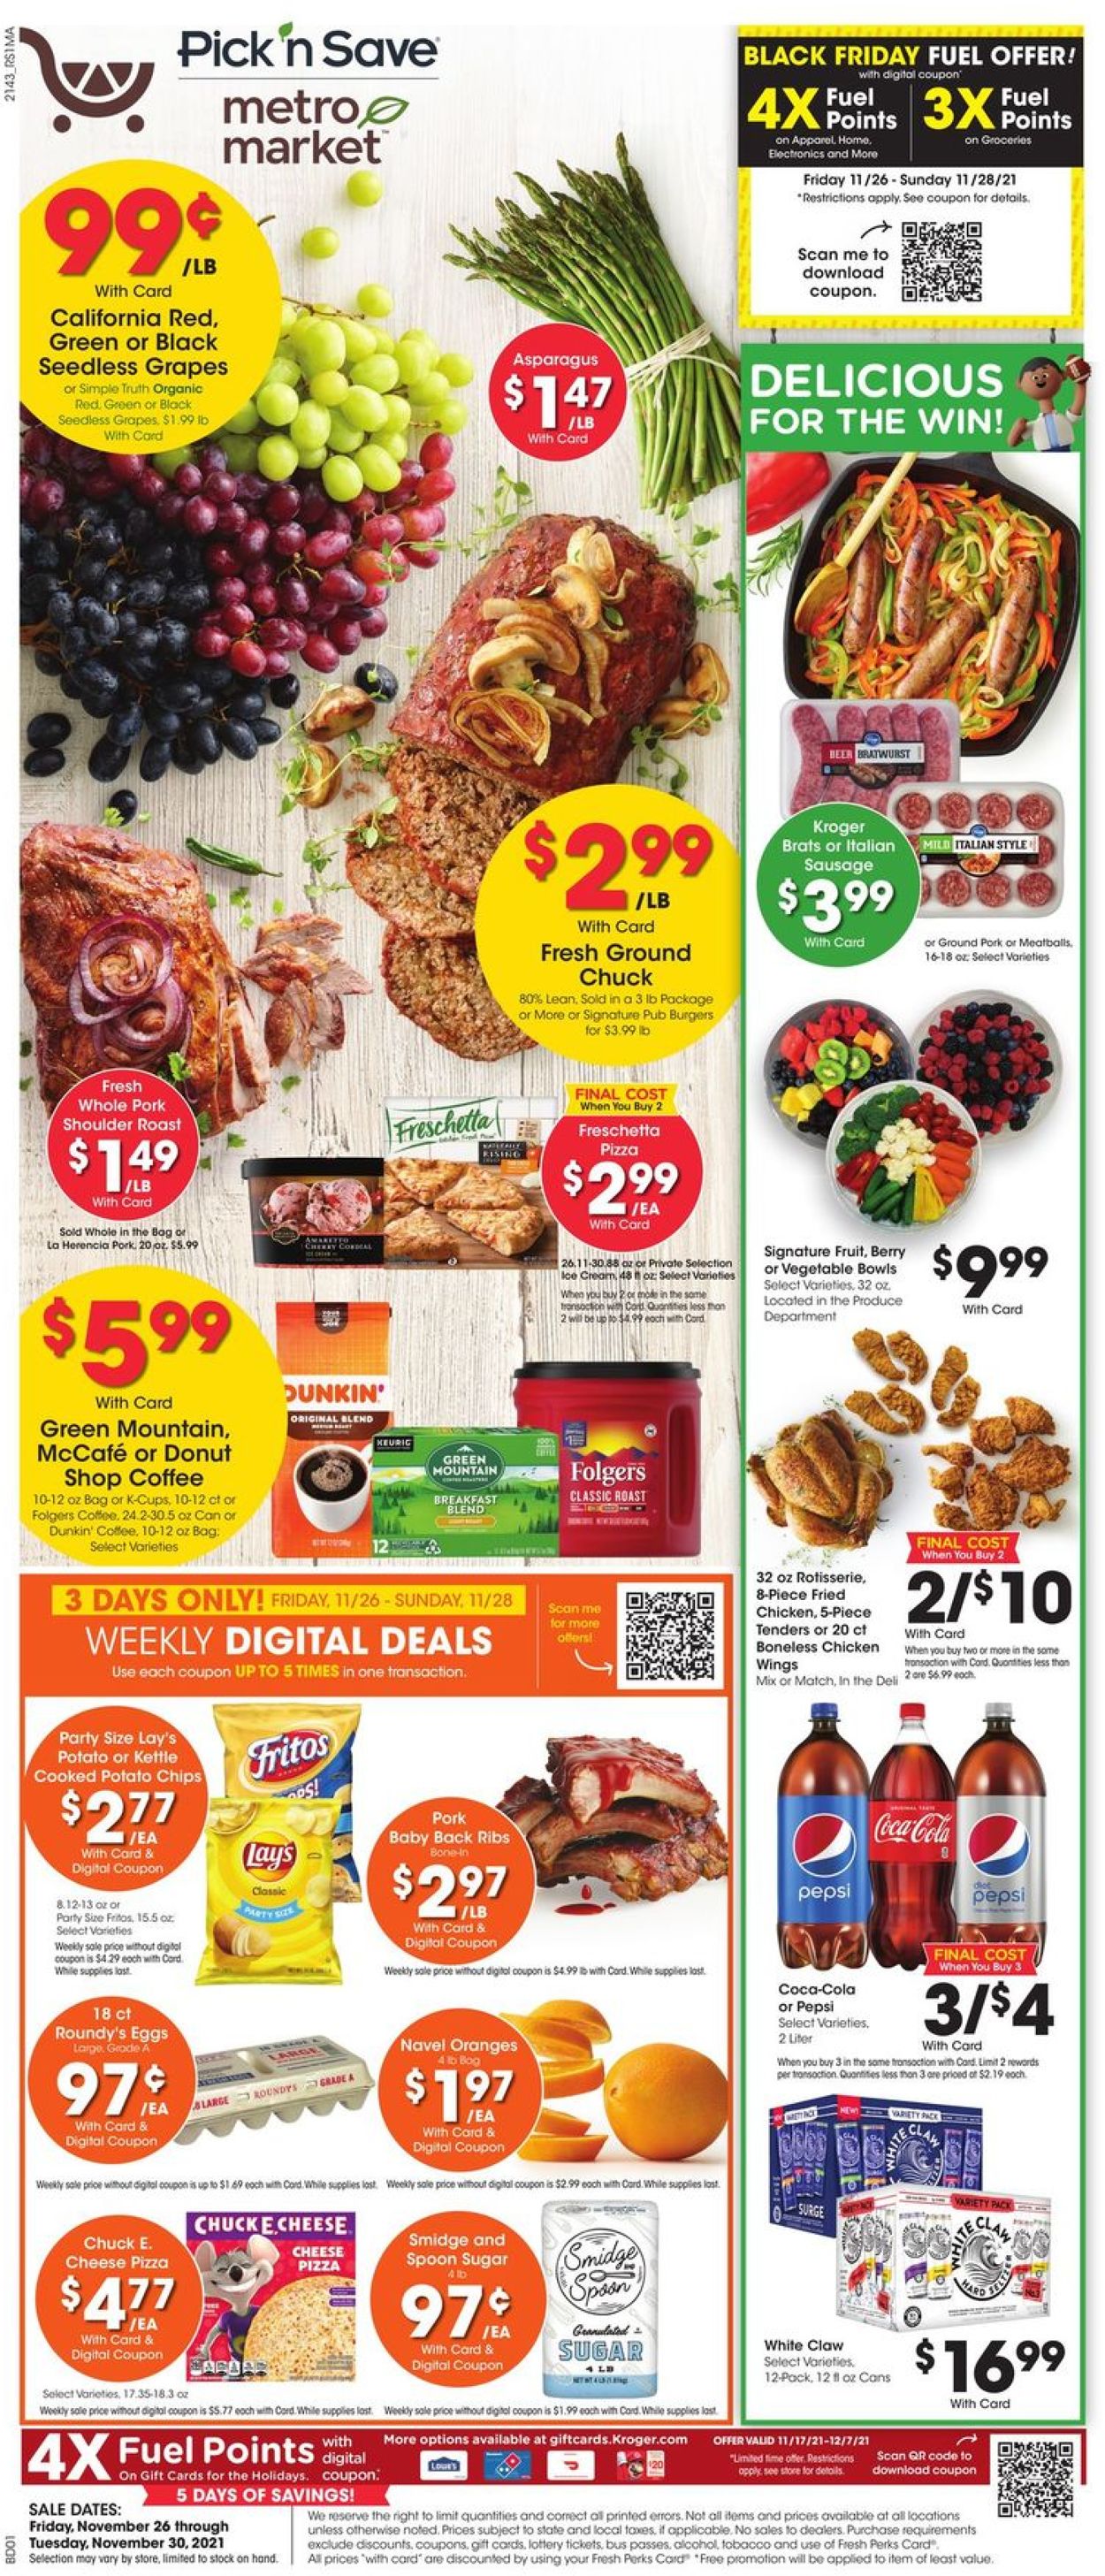 Metro Market Current weekly ad 11/26 - 11/30/2021 - frequent-ads.com